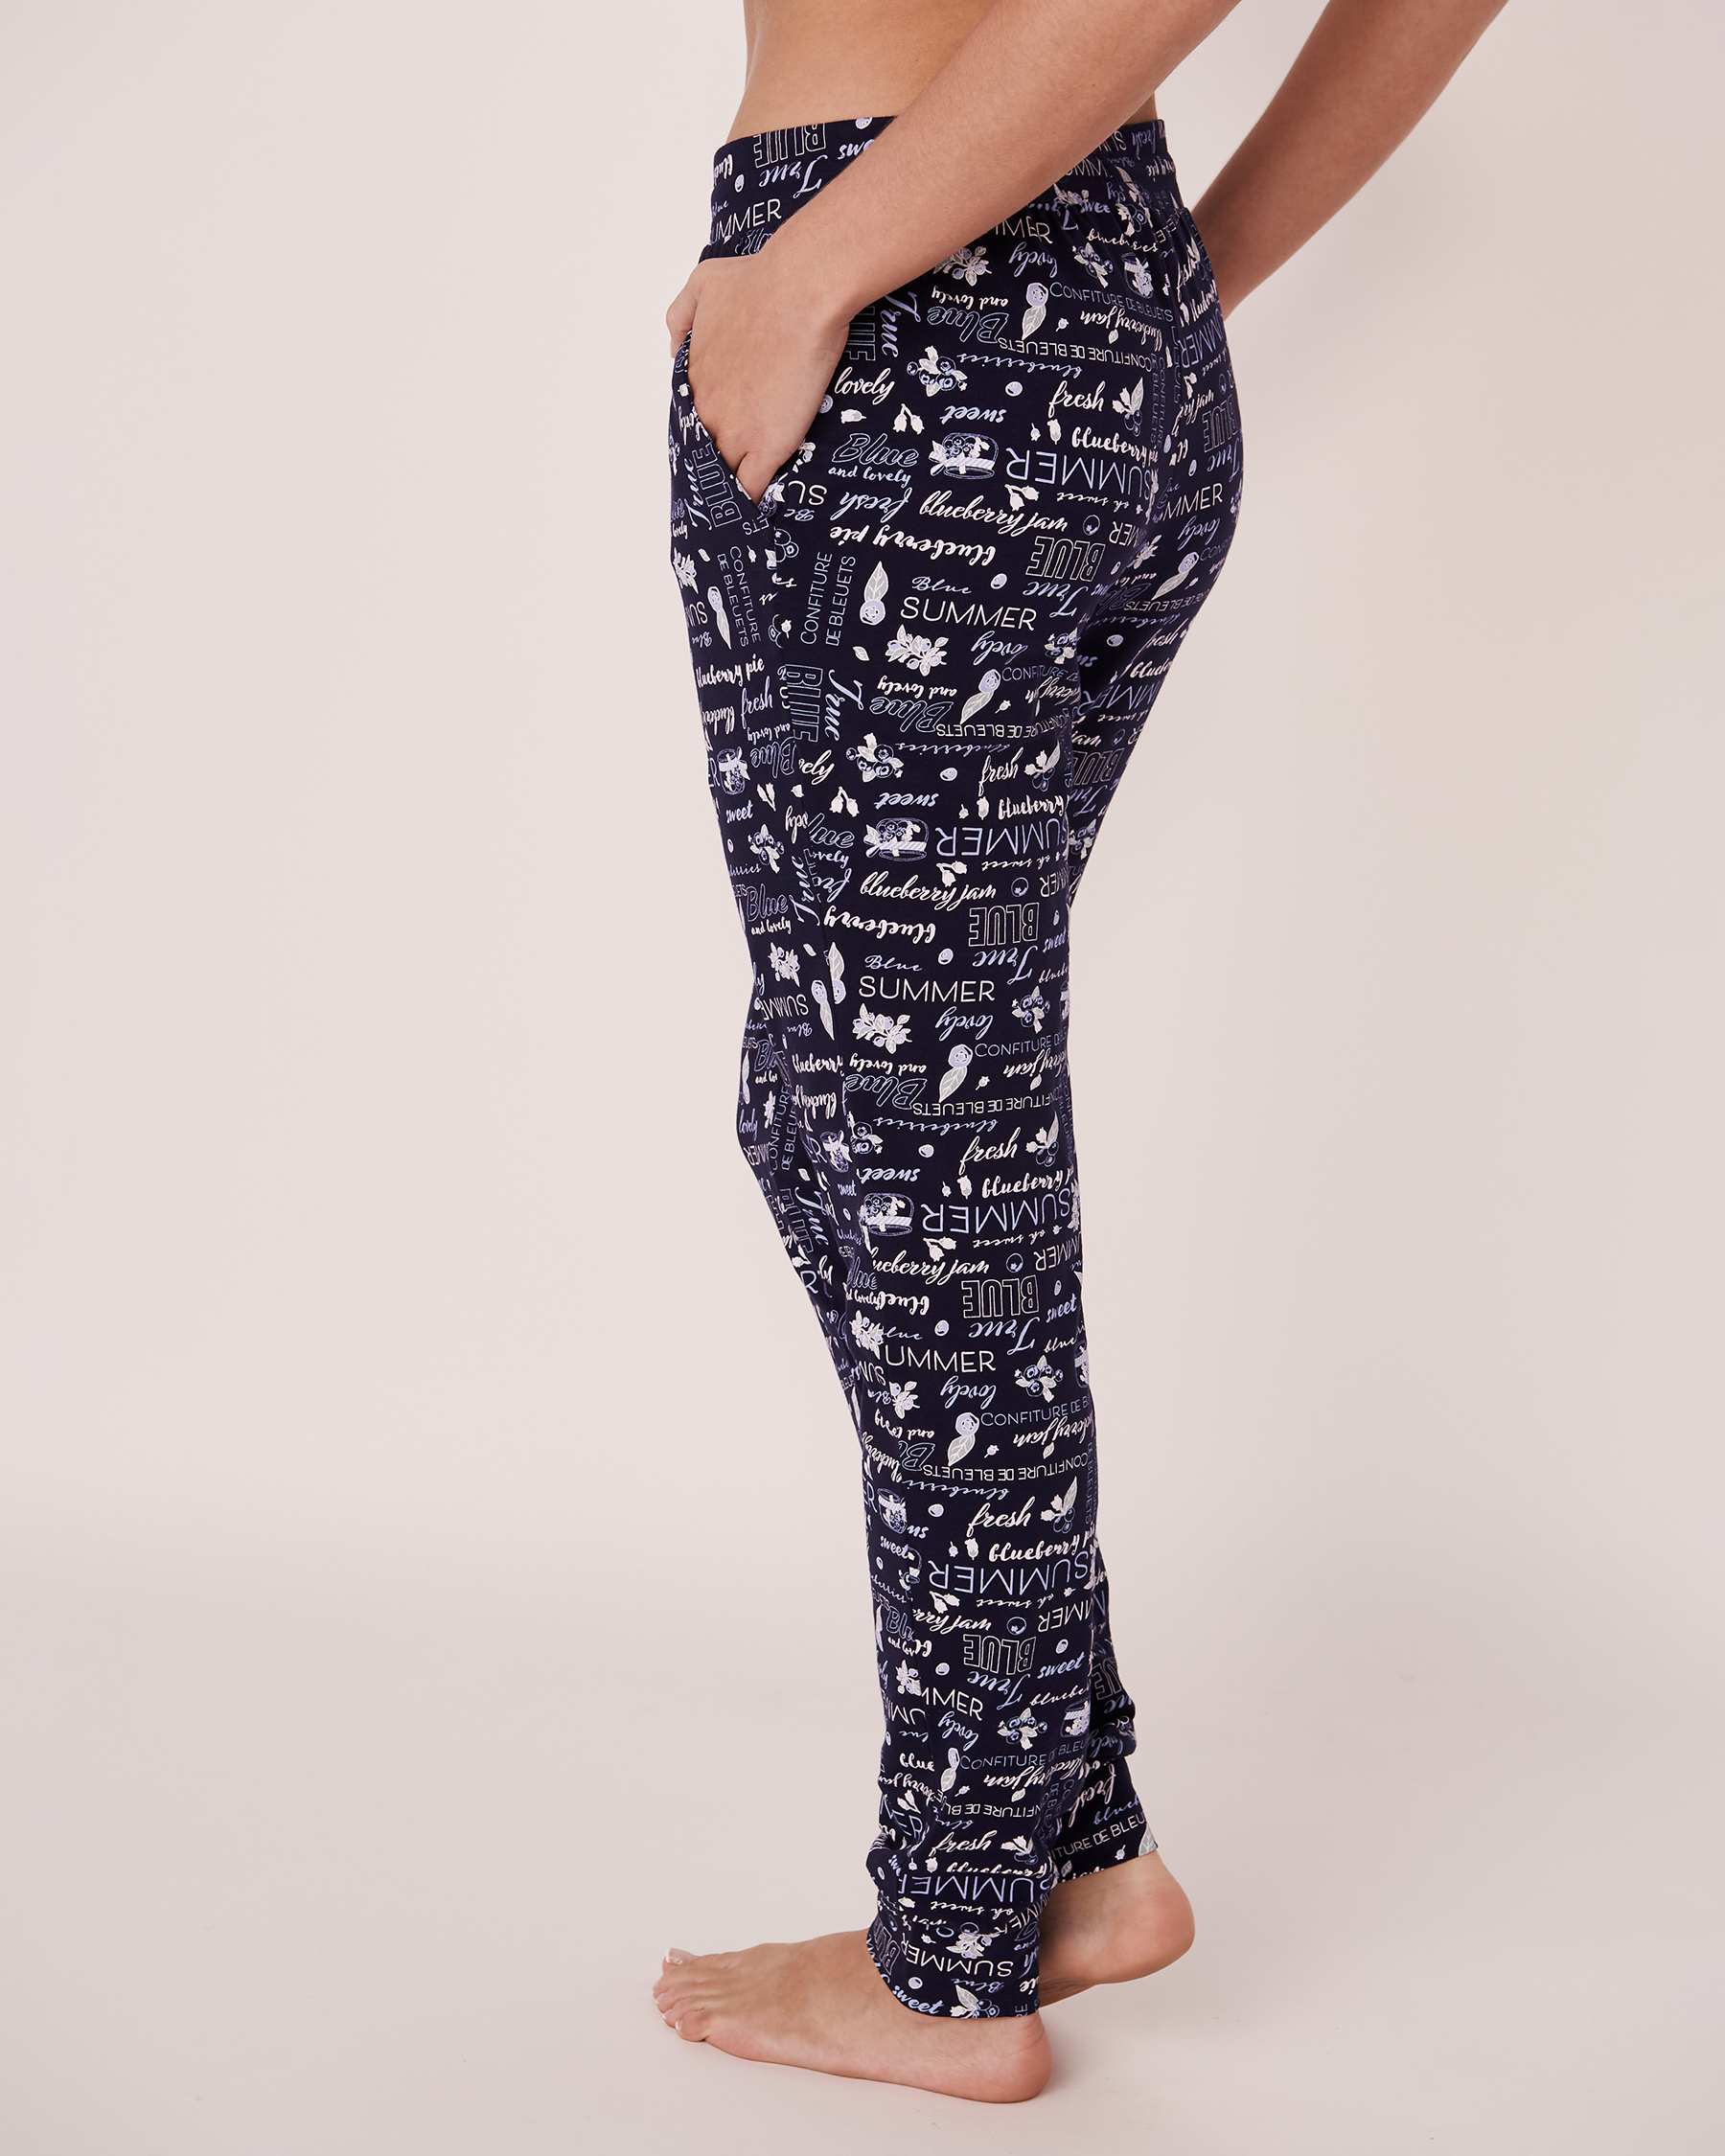 LA VIE EN ROSE Fitted Pants with Side Pockets Blueberries text 40200261 - View2